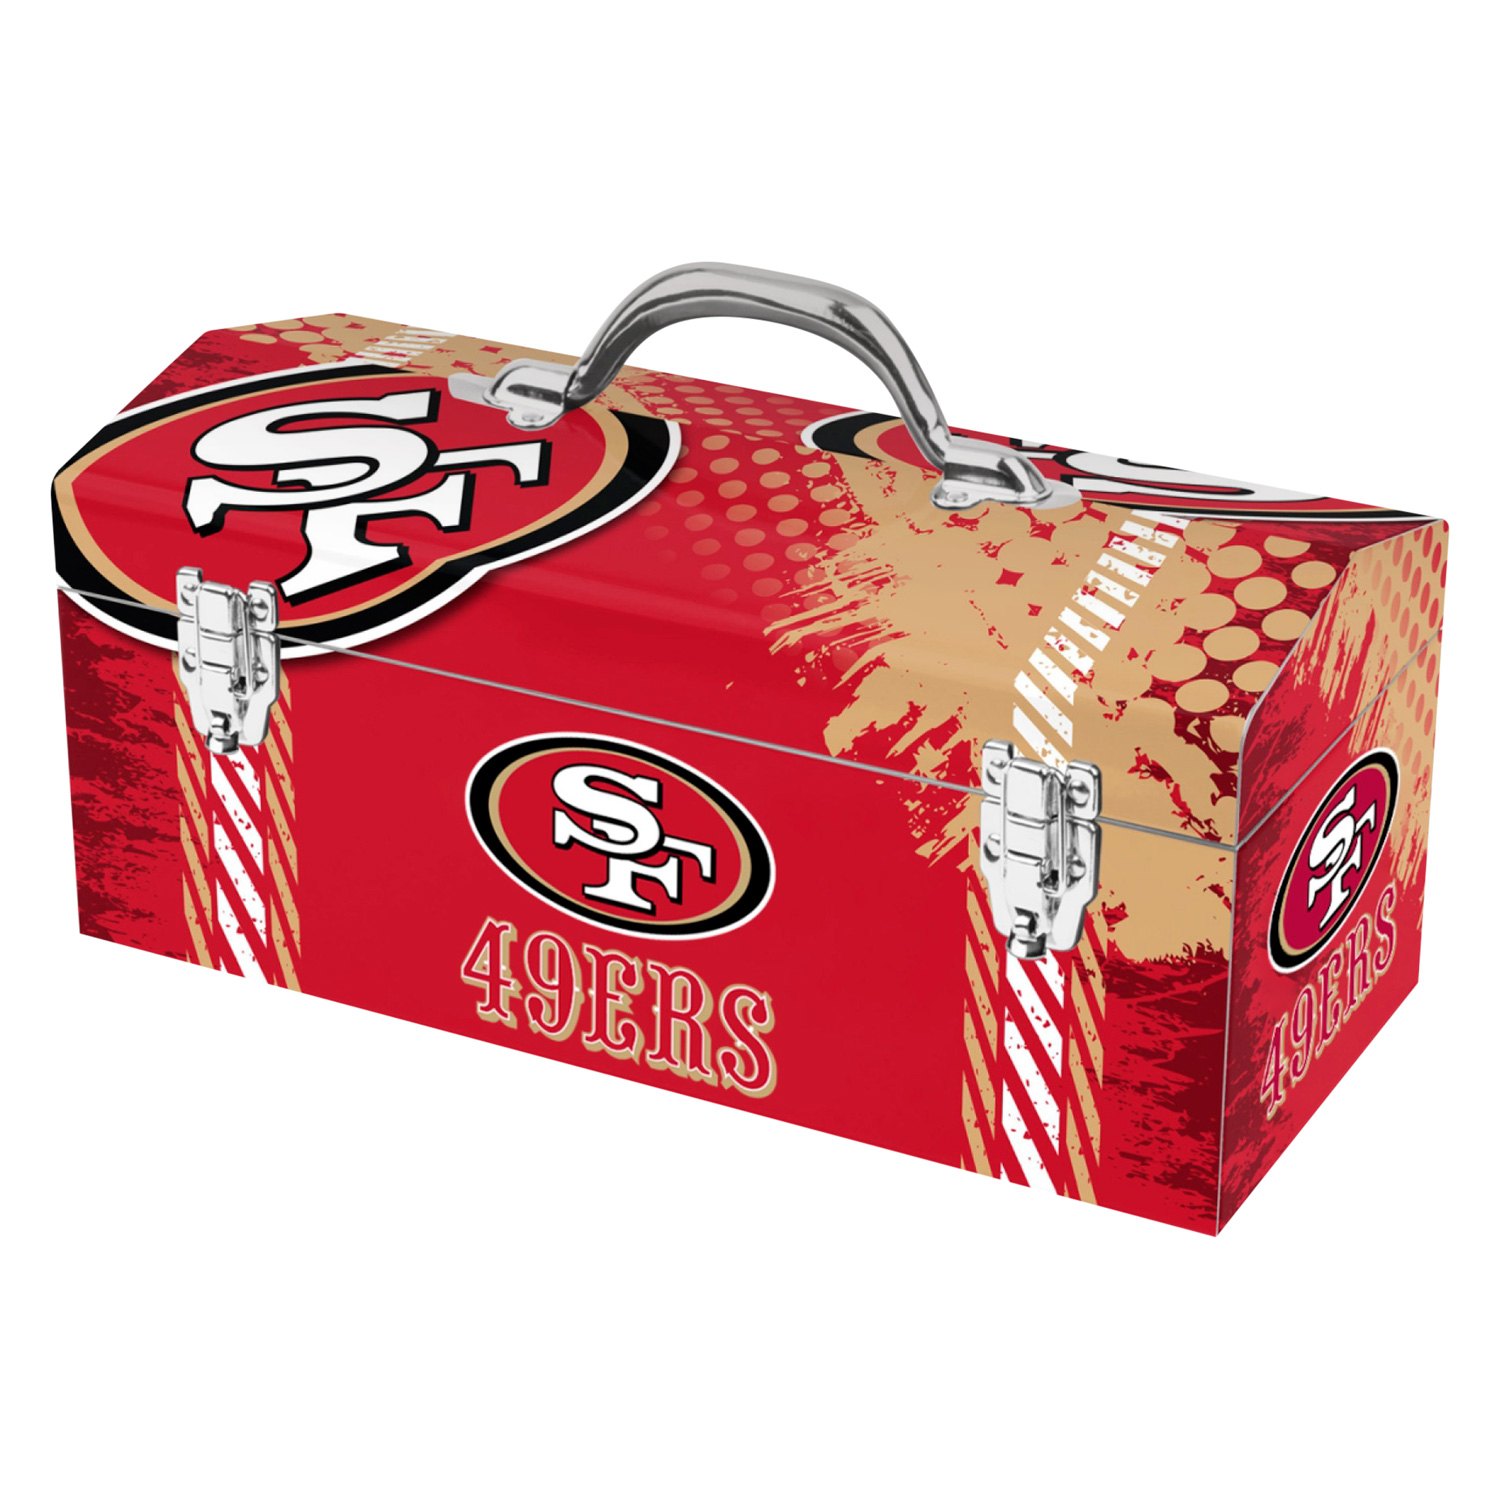 49ers the box